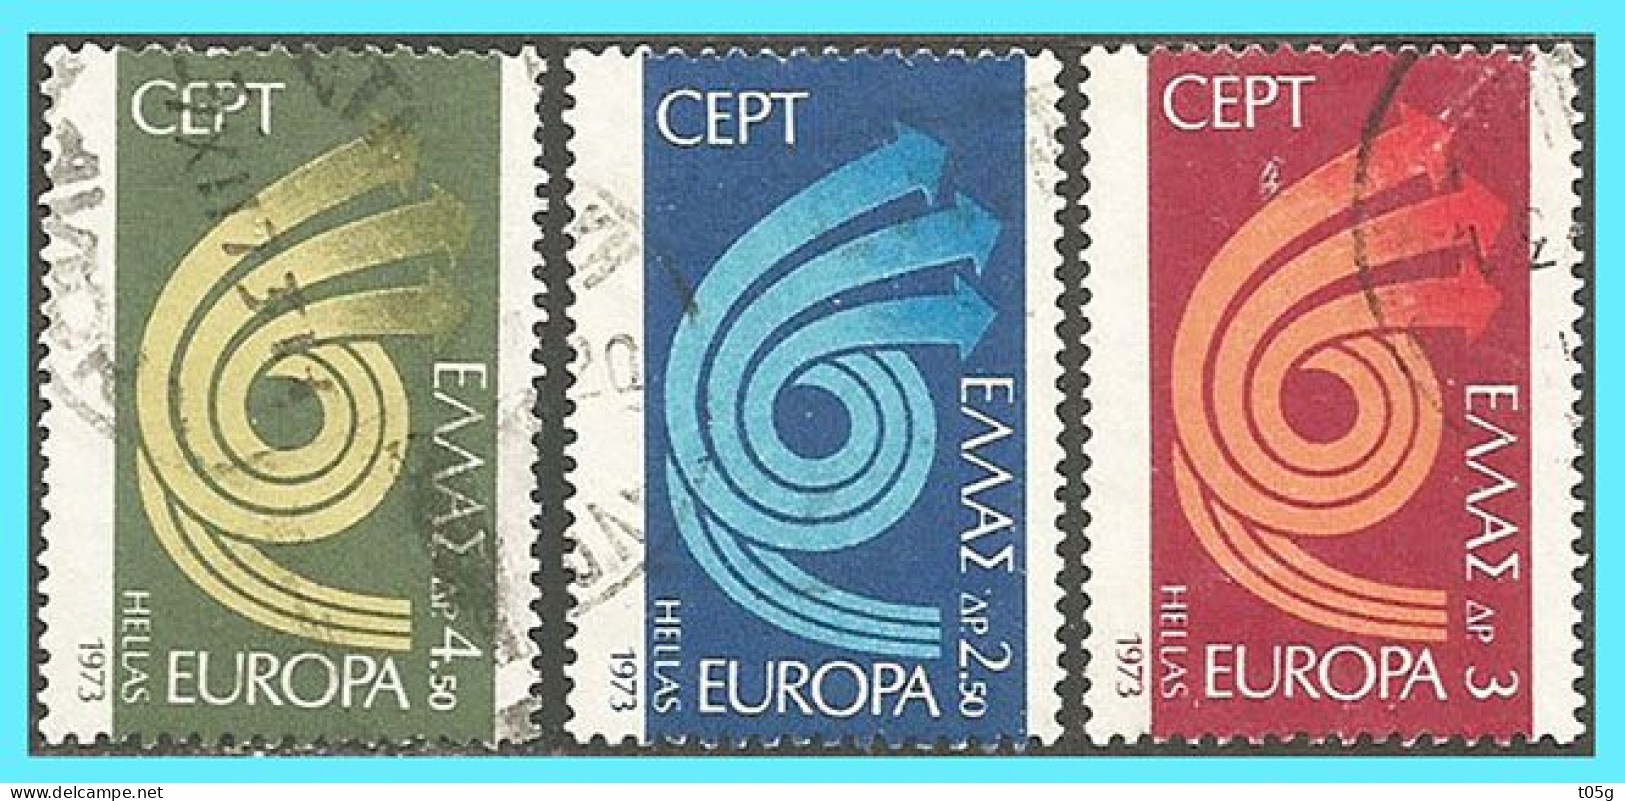 GREECE- GRECE  - HELLAS 1973: EUROPA CEPT  Compl. Set Used - Used Stamps